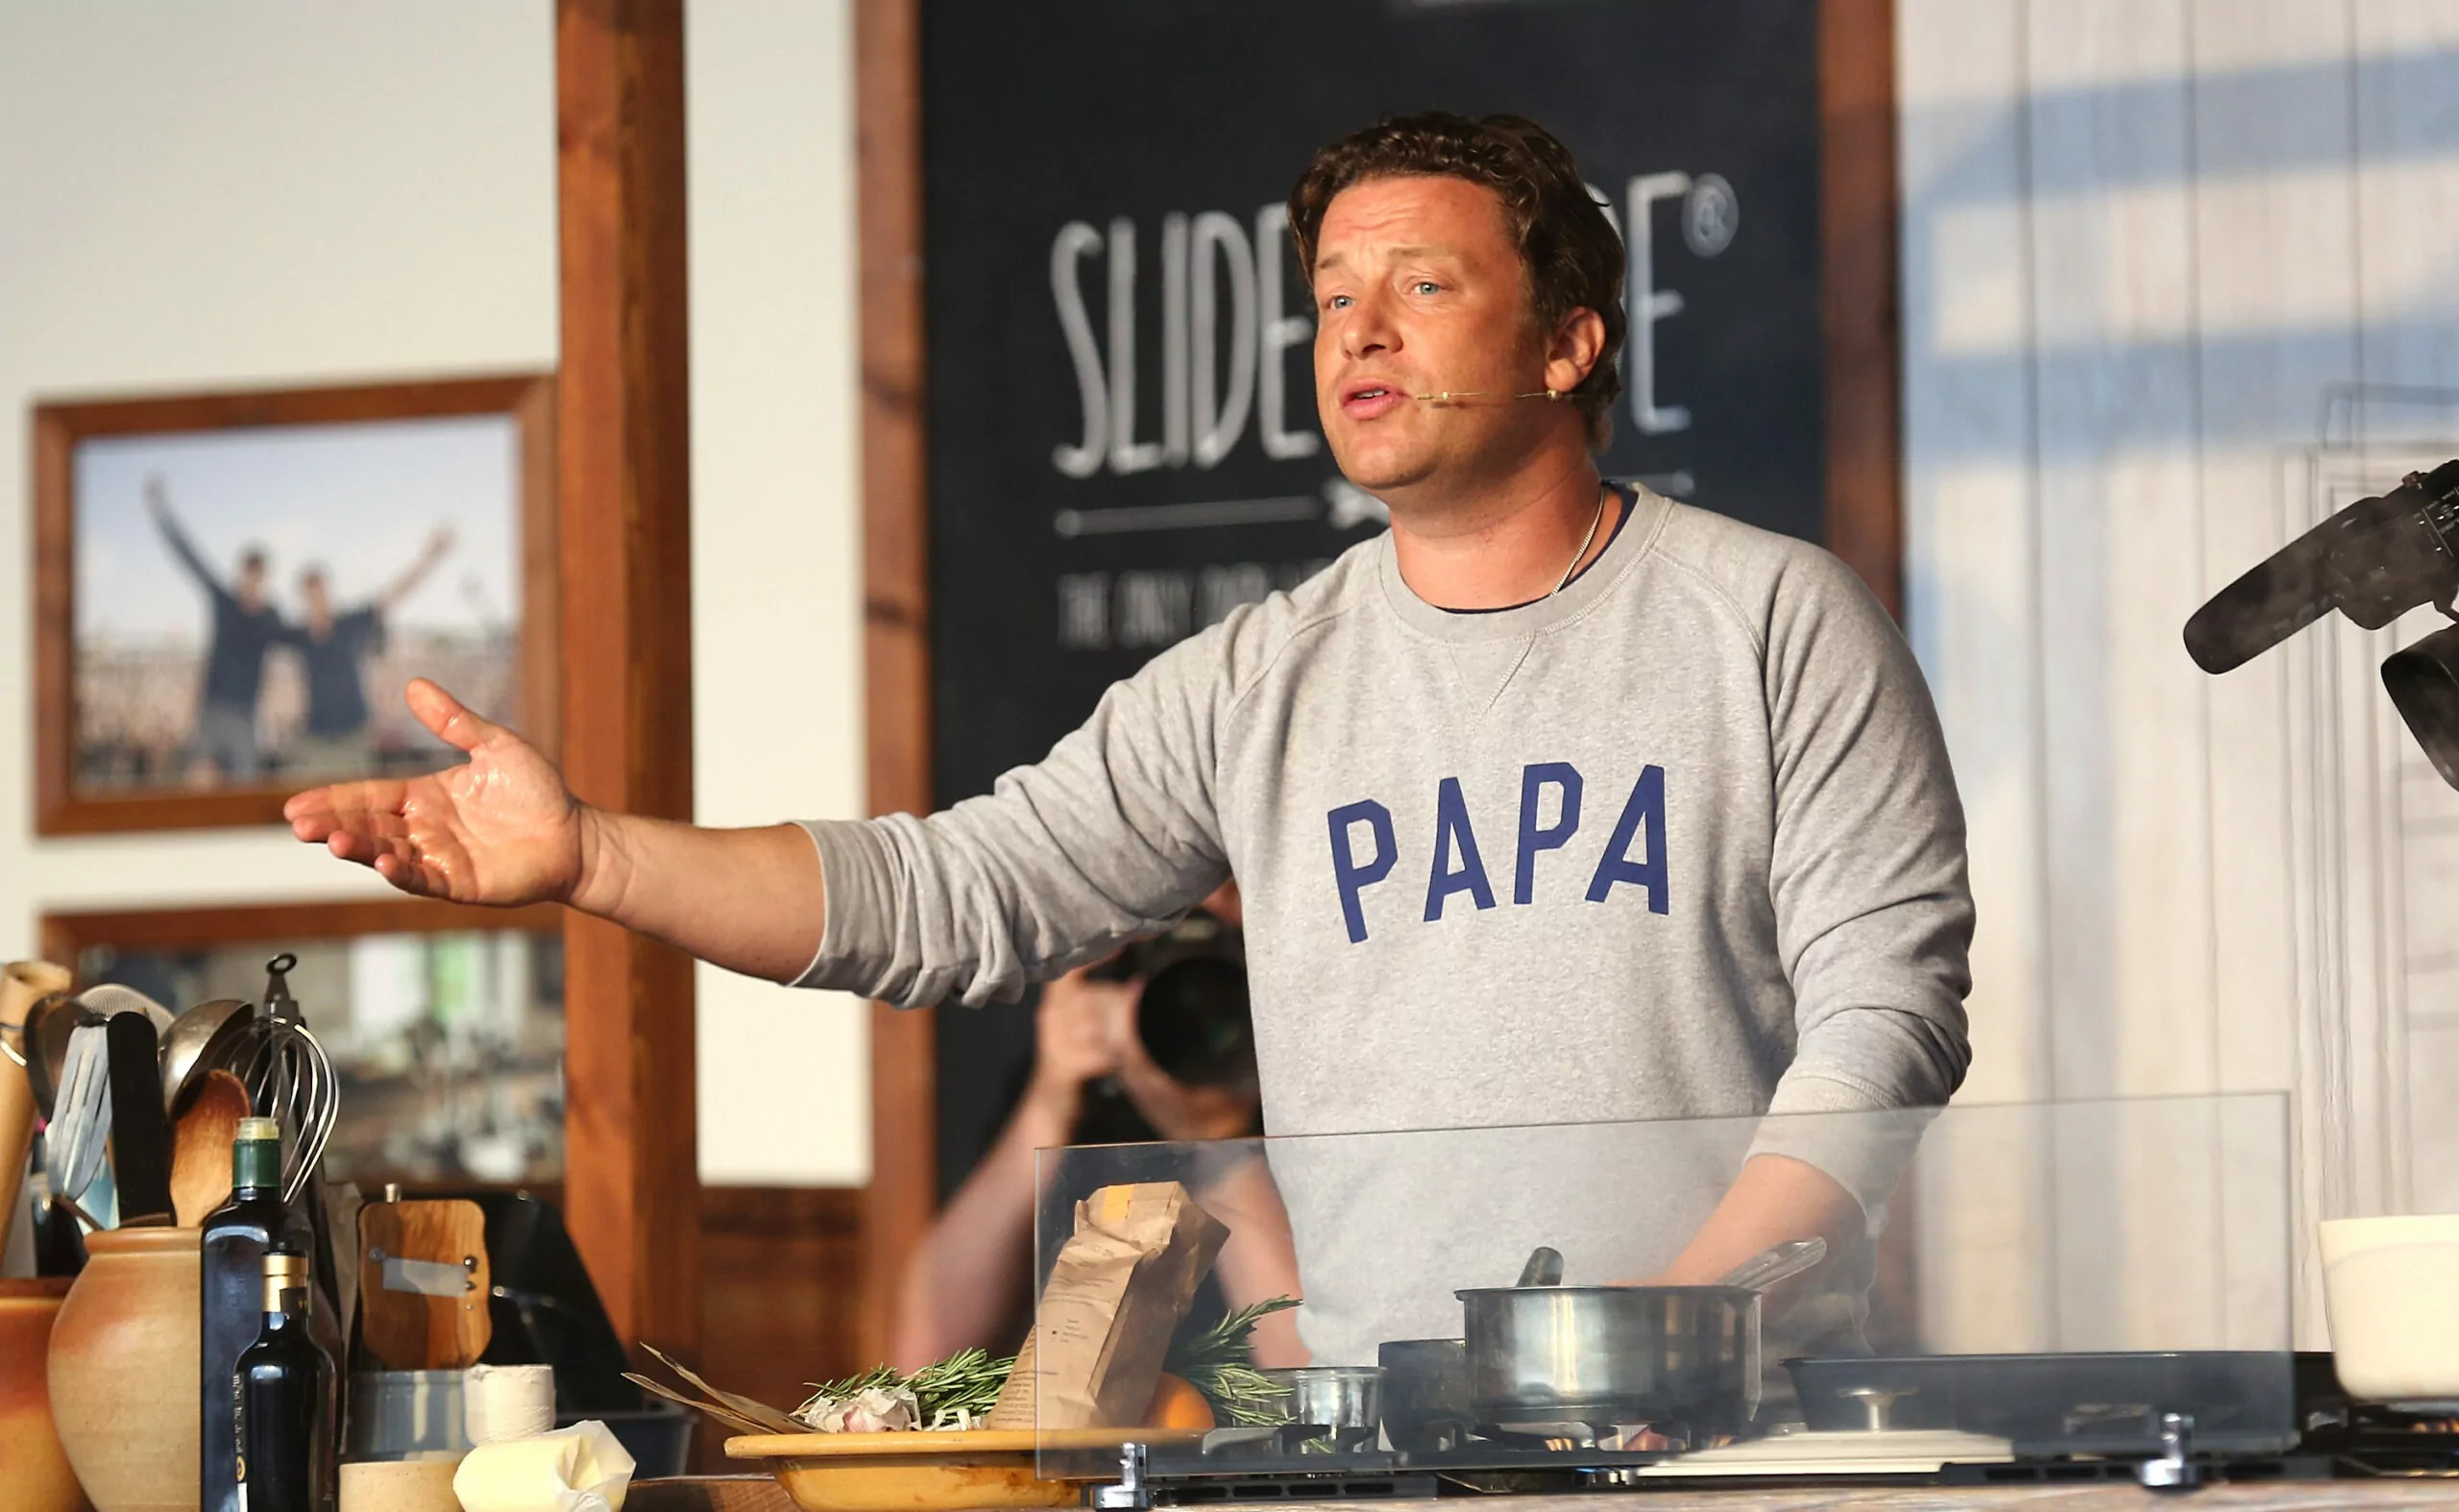 KINGHAM, OXFORDSHIRE - AUGUST 27: Jamie Oliver attends a cooking demonstration at the Neff Big Kitchen on day two of The Big Feastival at Alex James' Farm on August 27, 2016 in Kingham, Oxfordshire. (Photo by Tim P. Whitby/Getty Images)